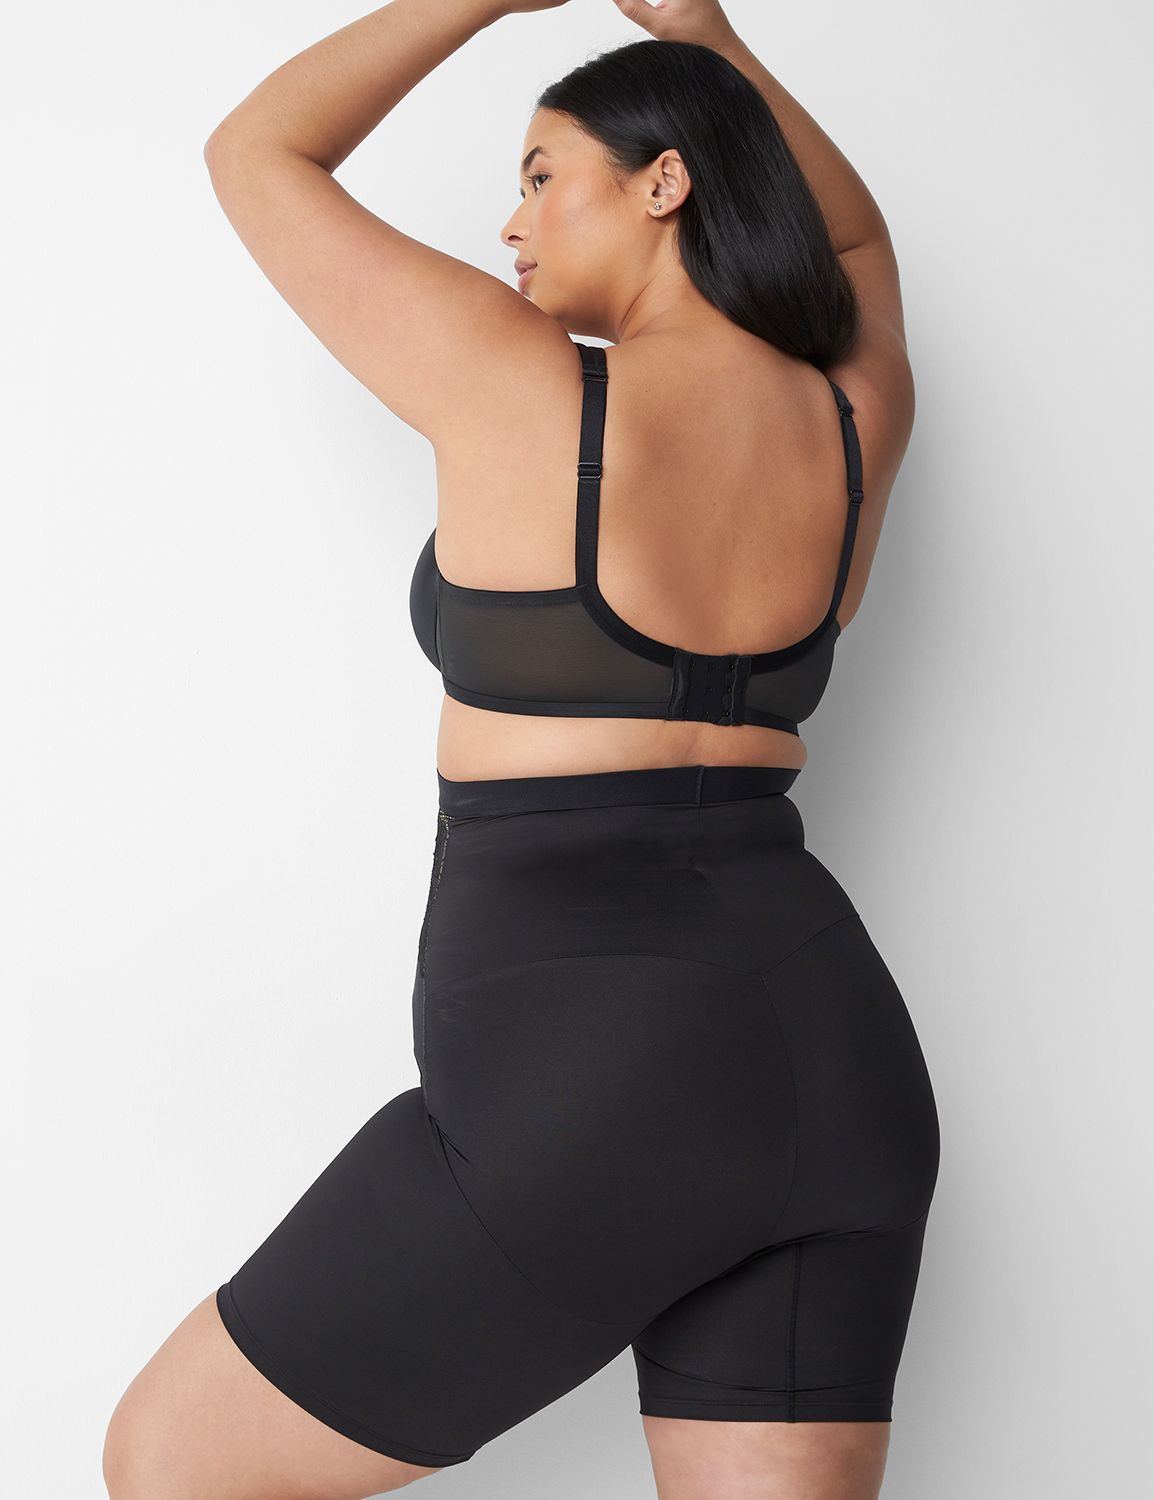 Life's need By T&h collection Artical lanina full body shaper